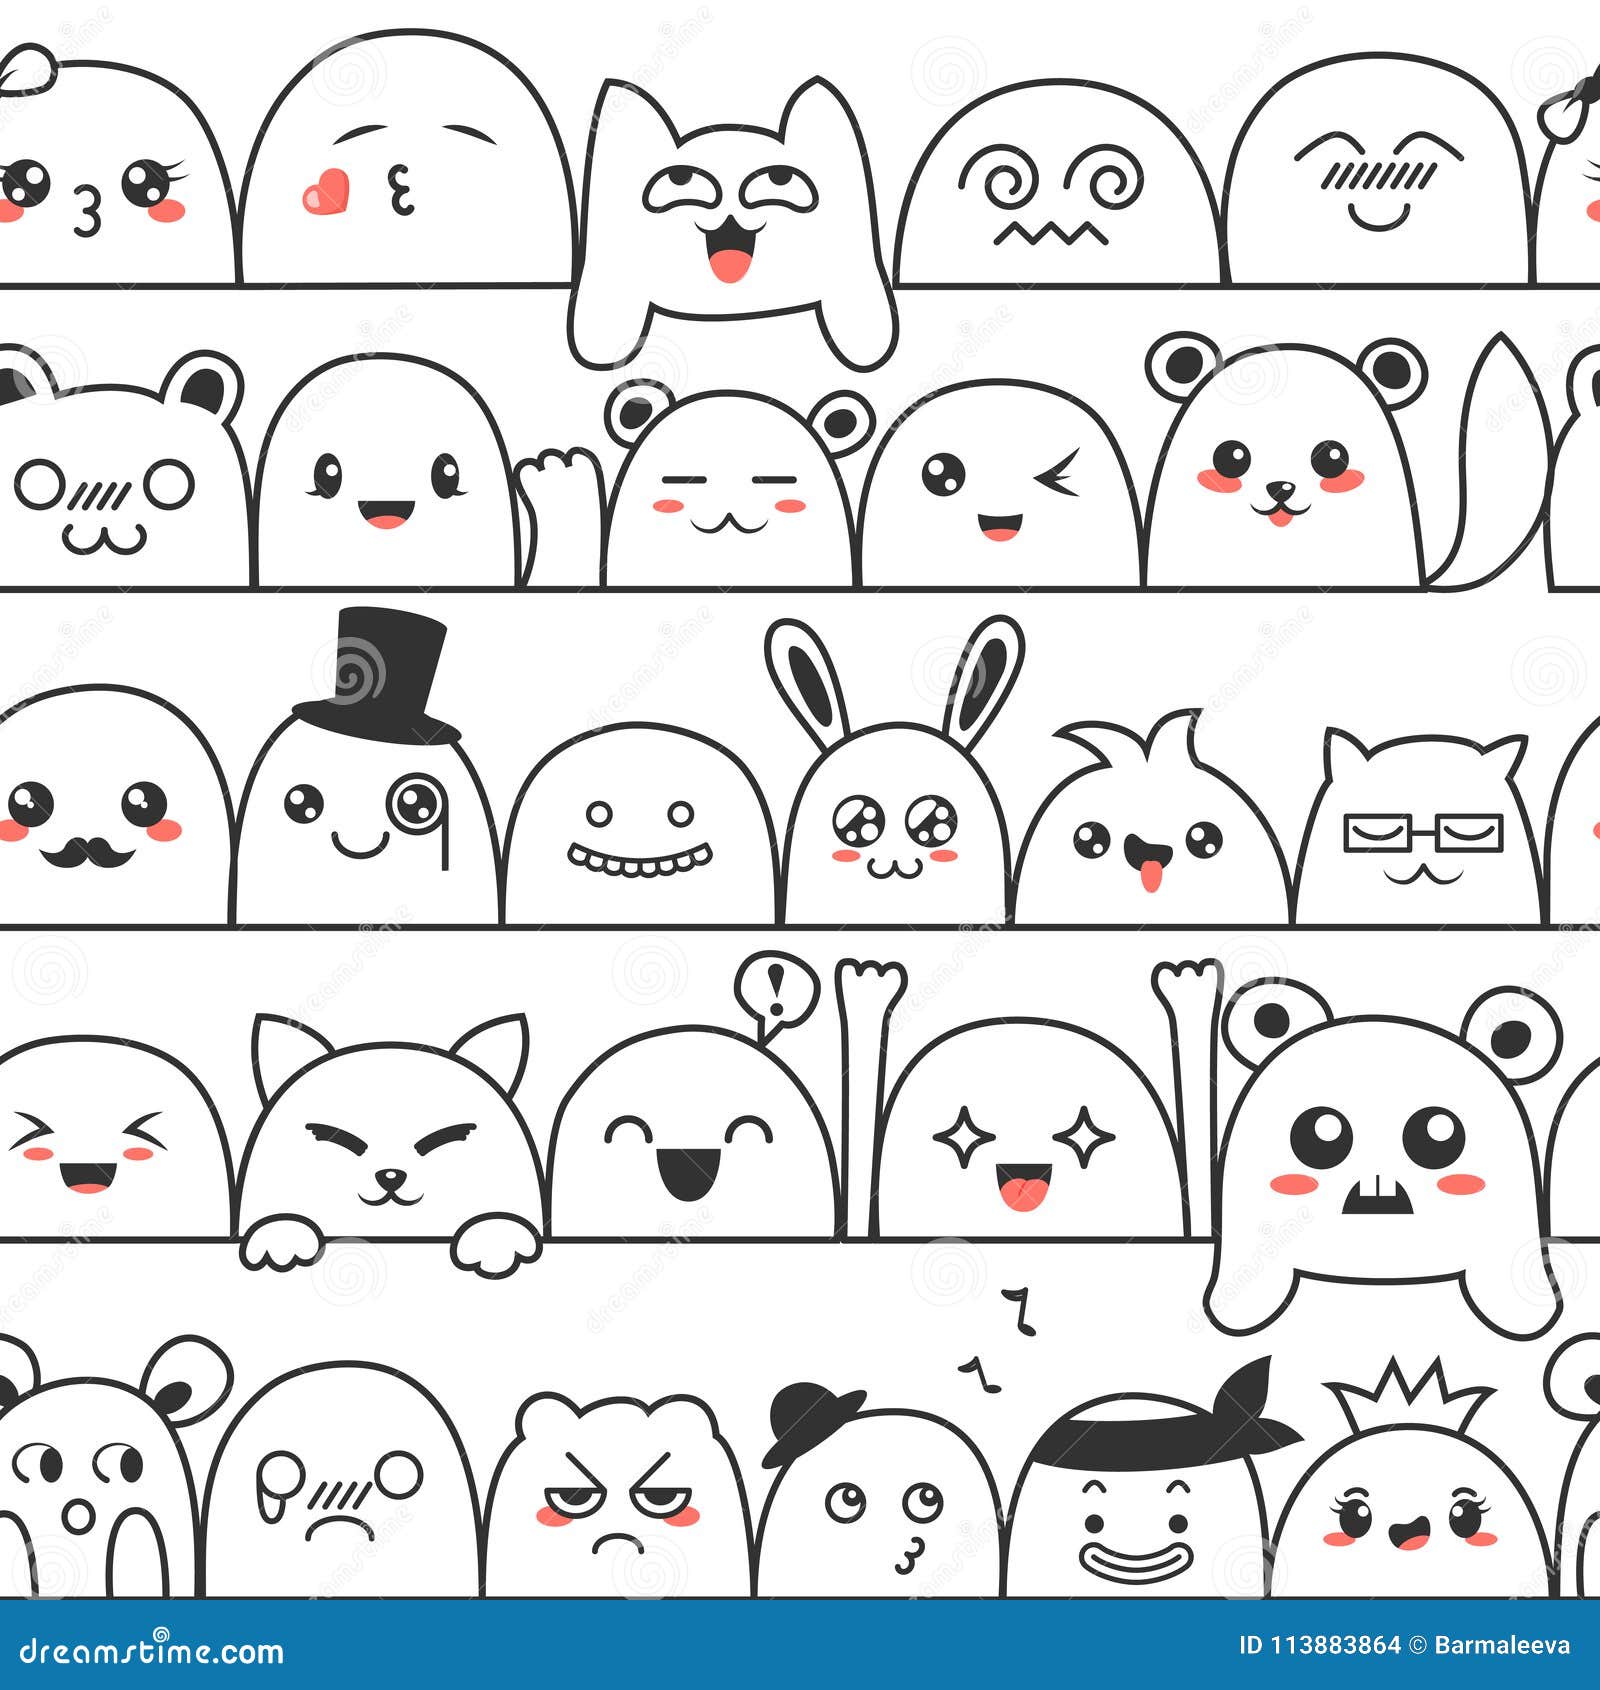 seamless pattern with cute lovely kawaii monsters and animals. doodle cartoon clouds with faces in manga style. cute